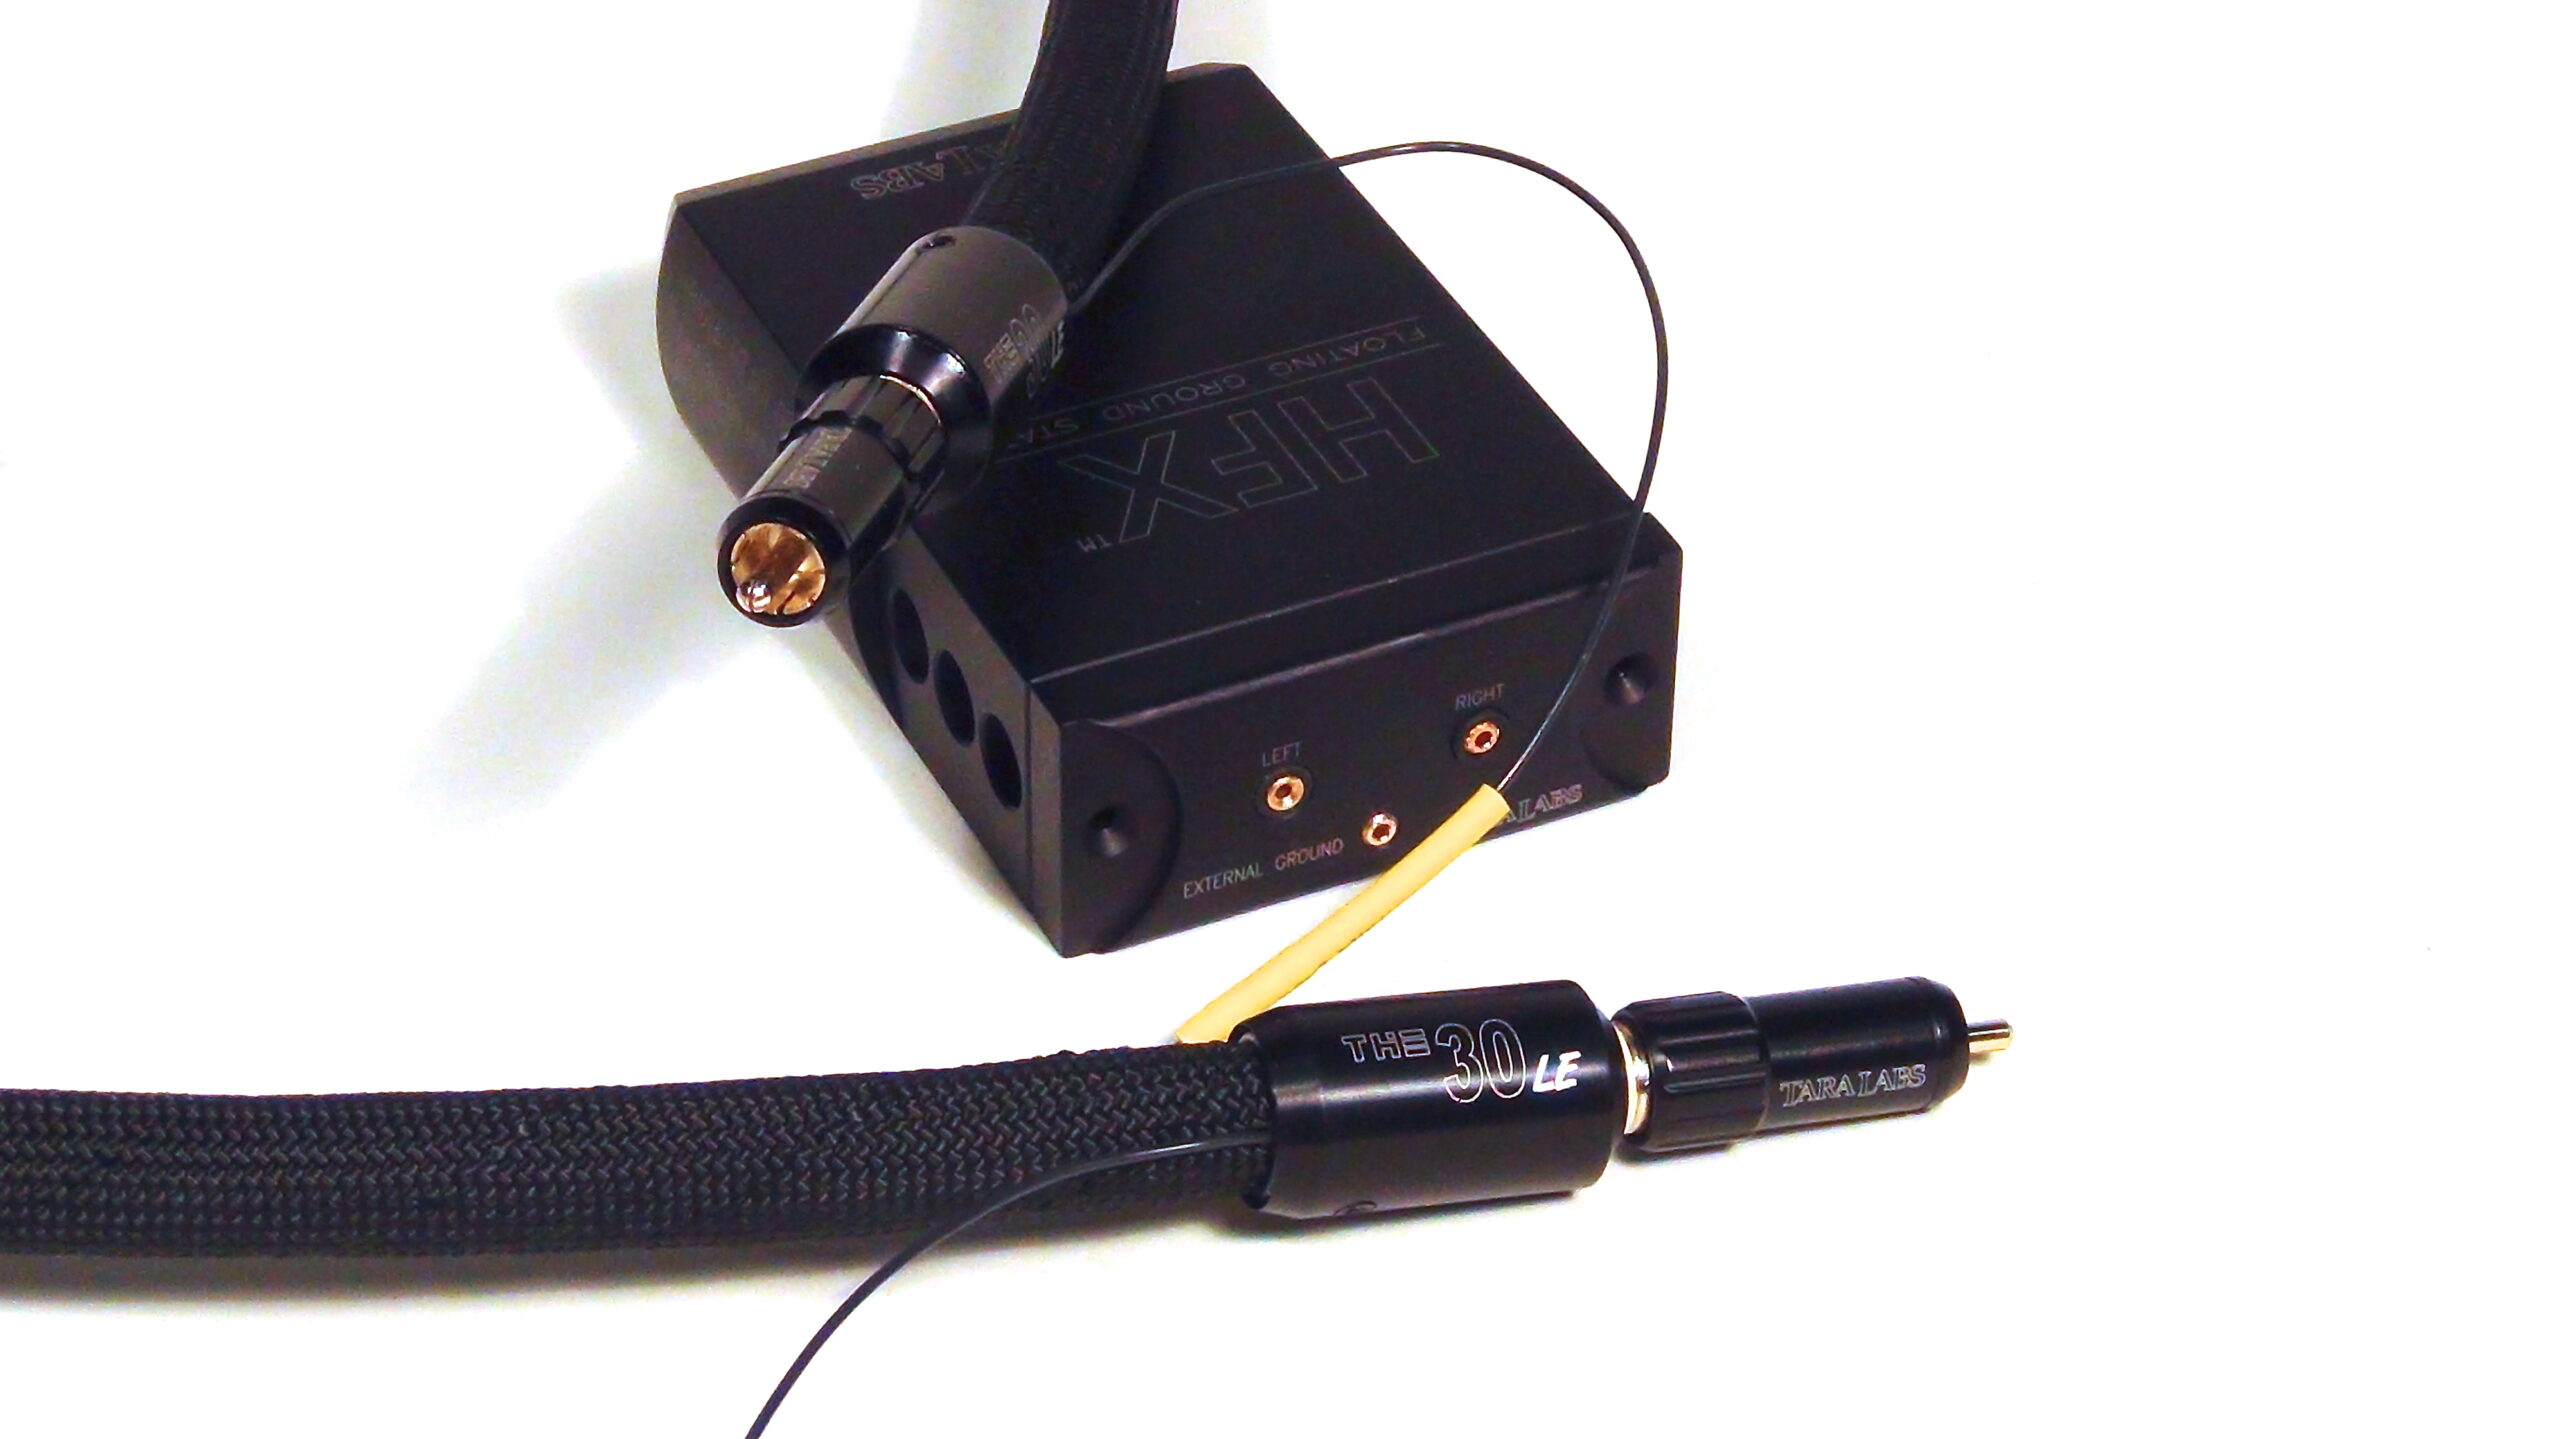 TARA Labs celebrates their 30 year anniversary with “The 30LE” audio cable!